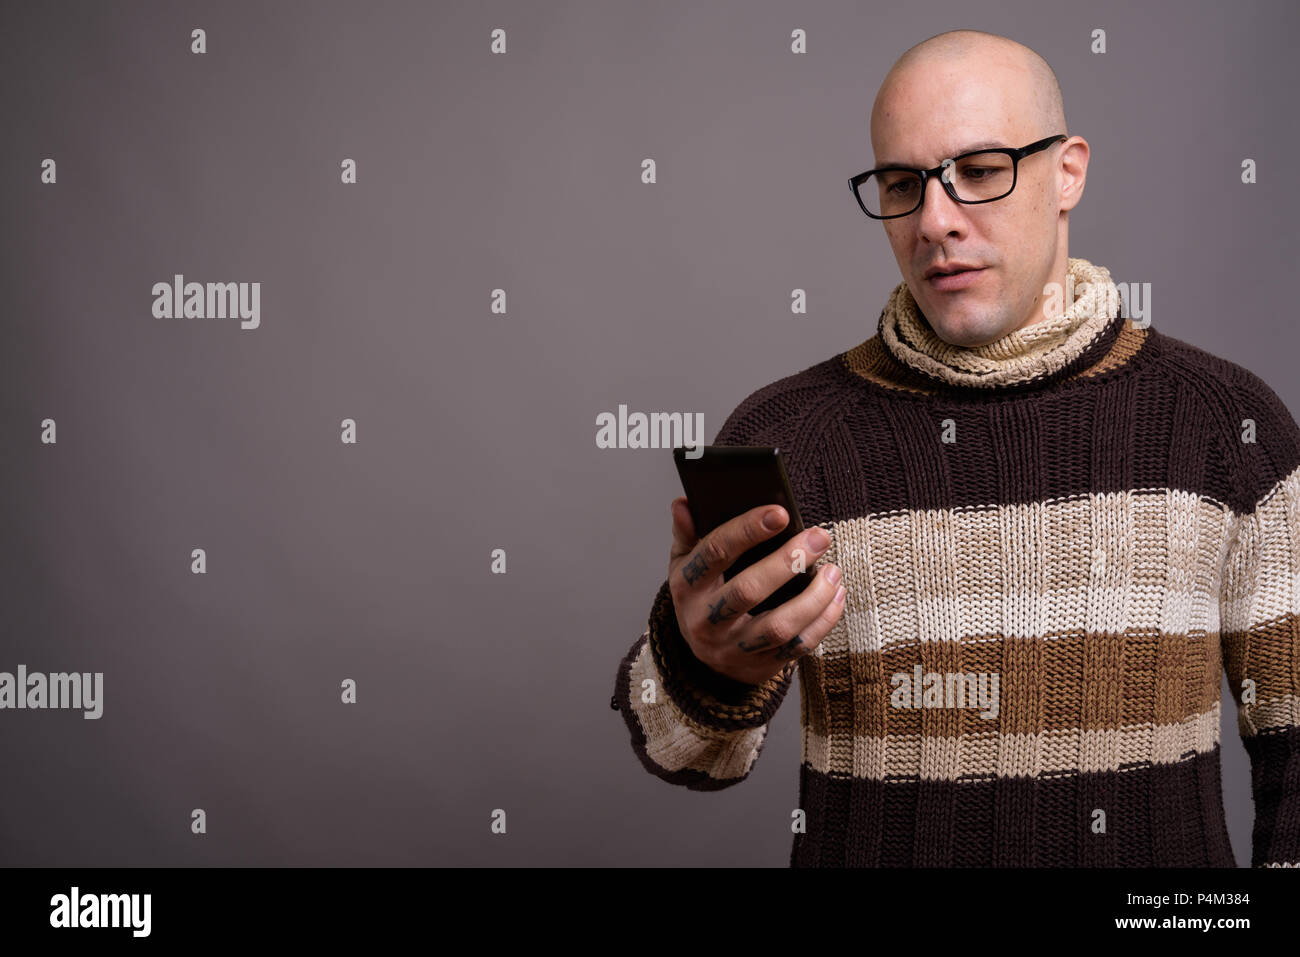 Handsome bald man against gray background Stock Photo